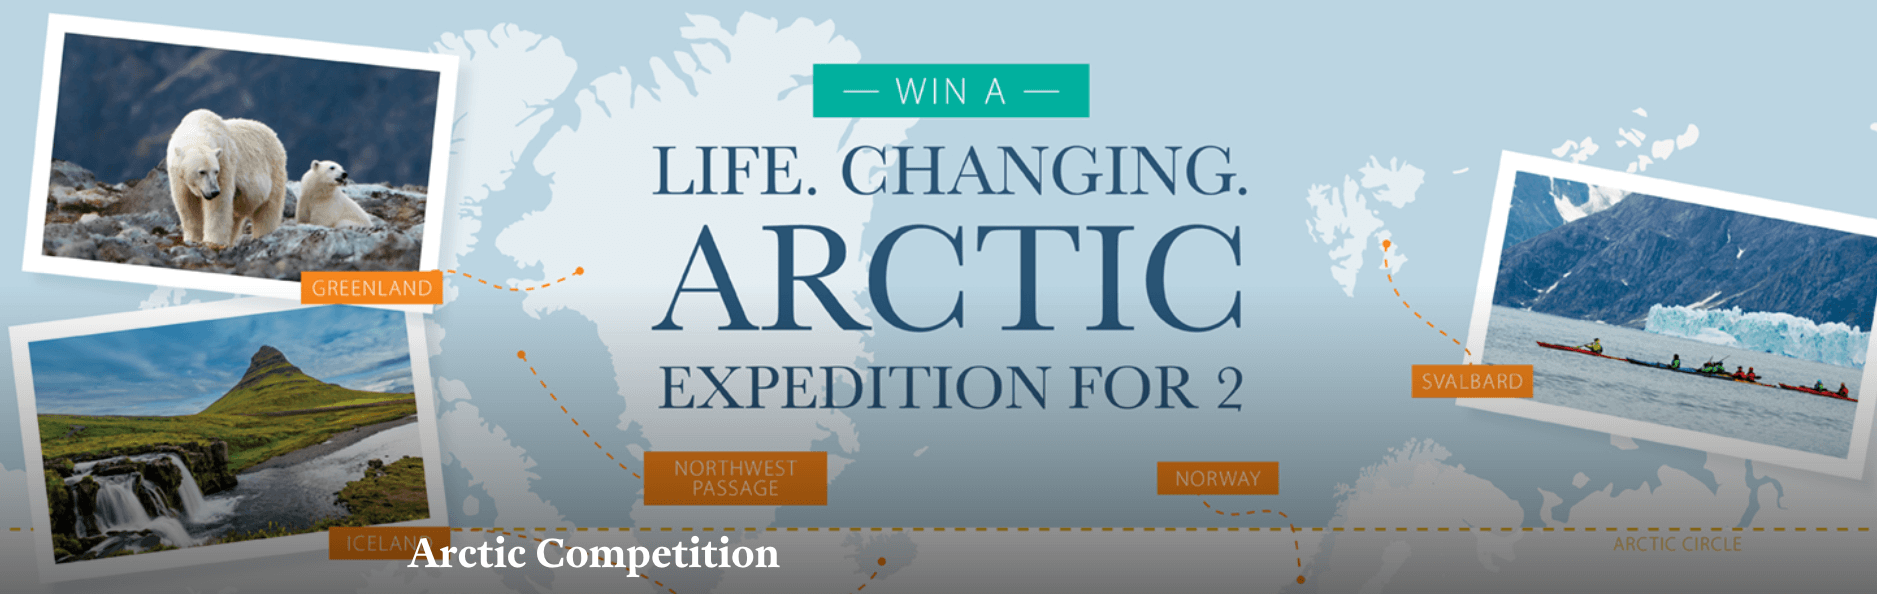 Win an Arctic cruise for 2 with AE Expeditions